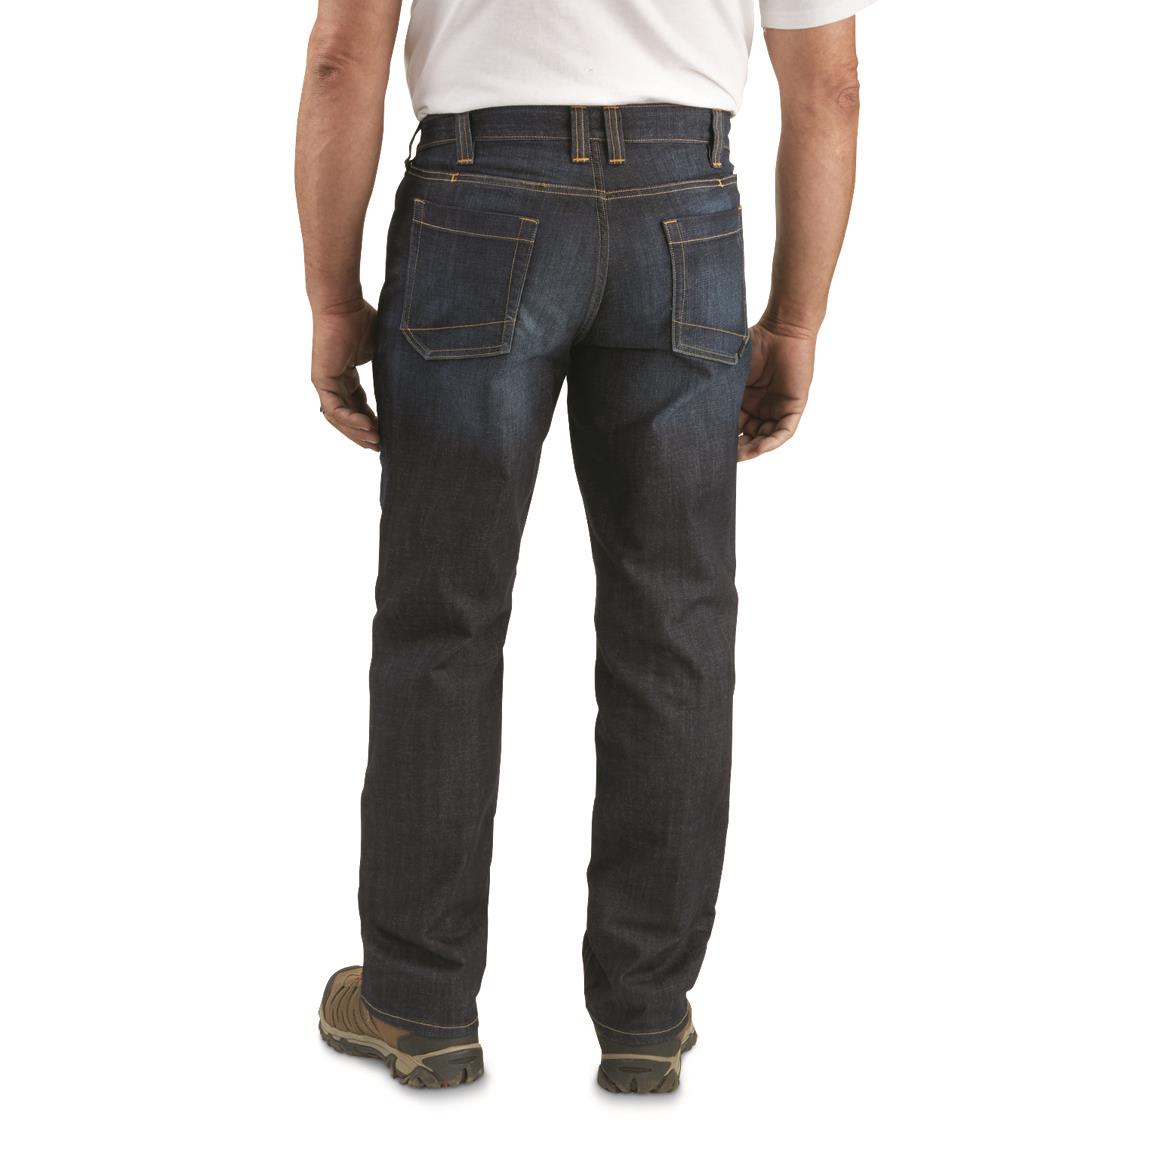 511 tactical jeans